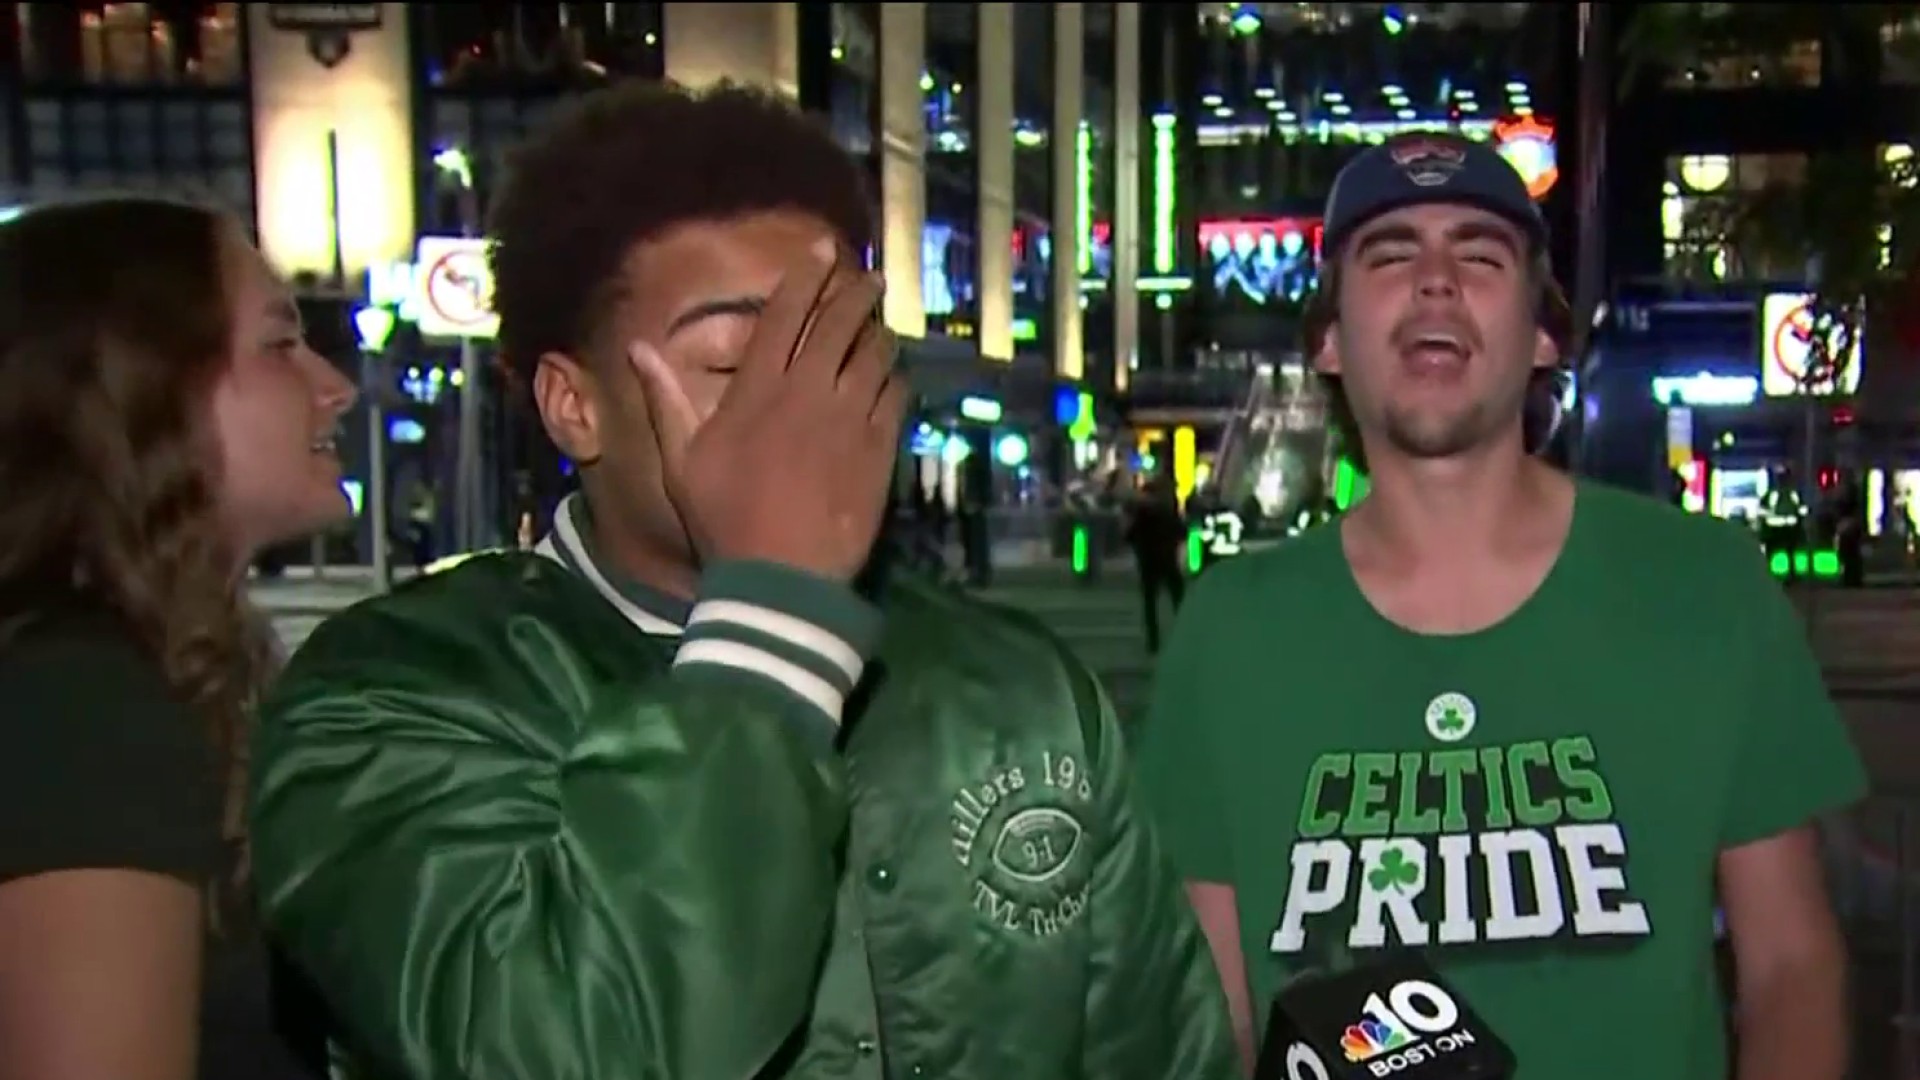 Celtics Fans in Stunned Disbelief After Brutal Game 7 Loss in Boston – NBC  Boston